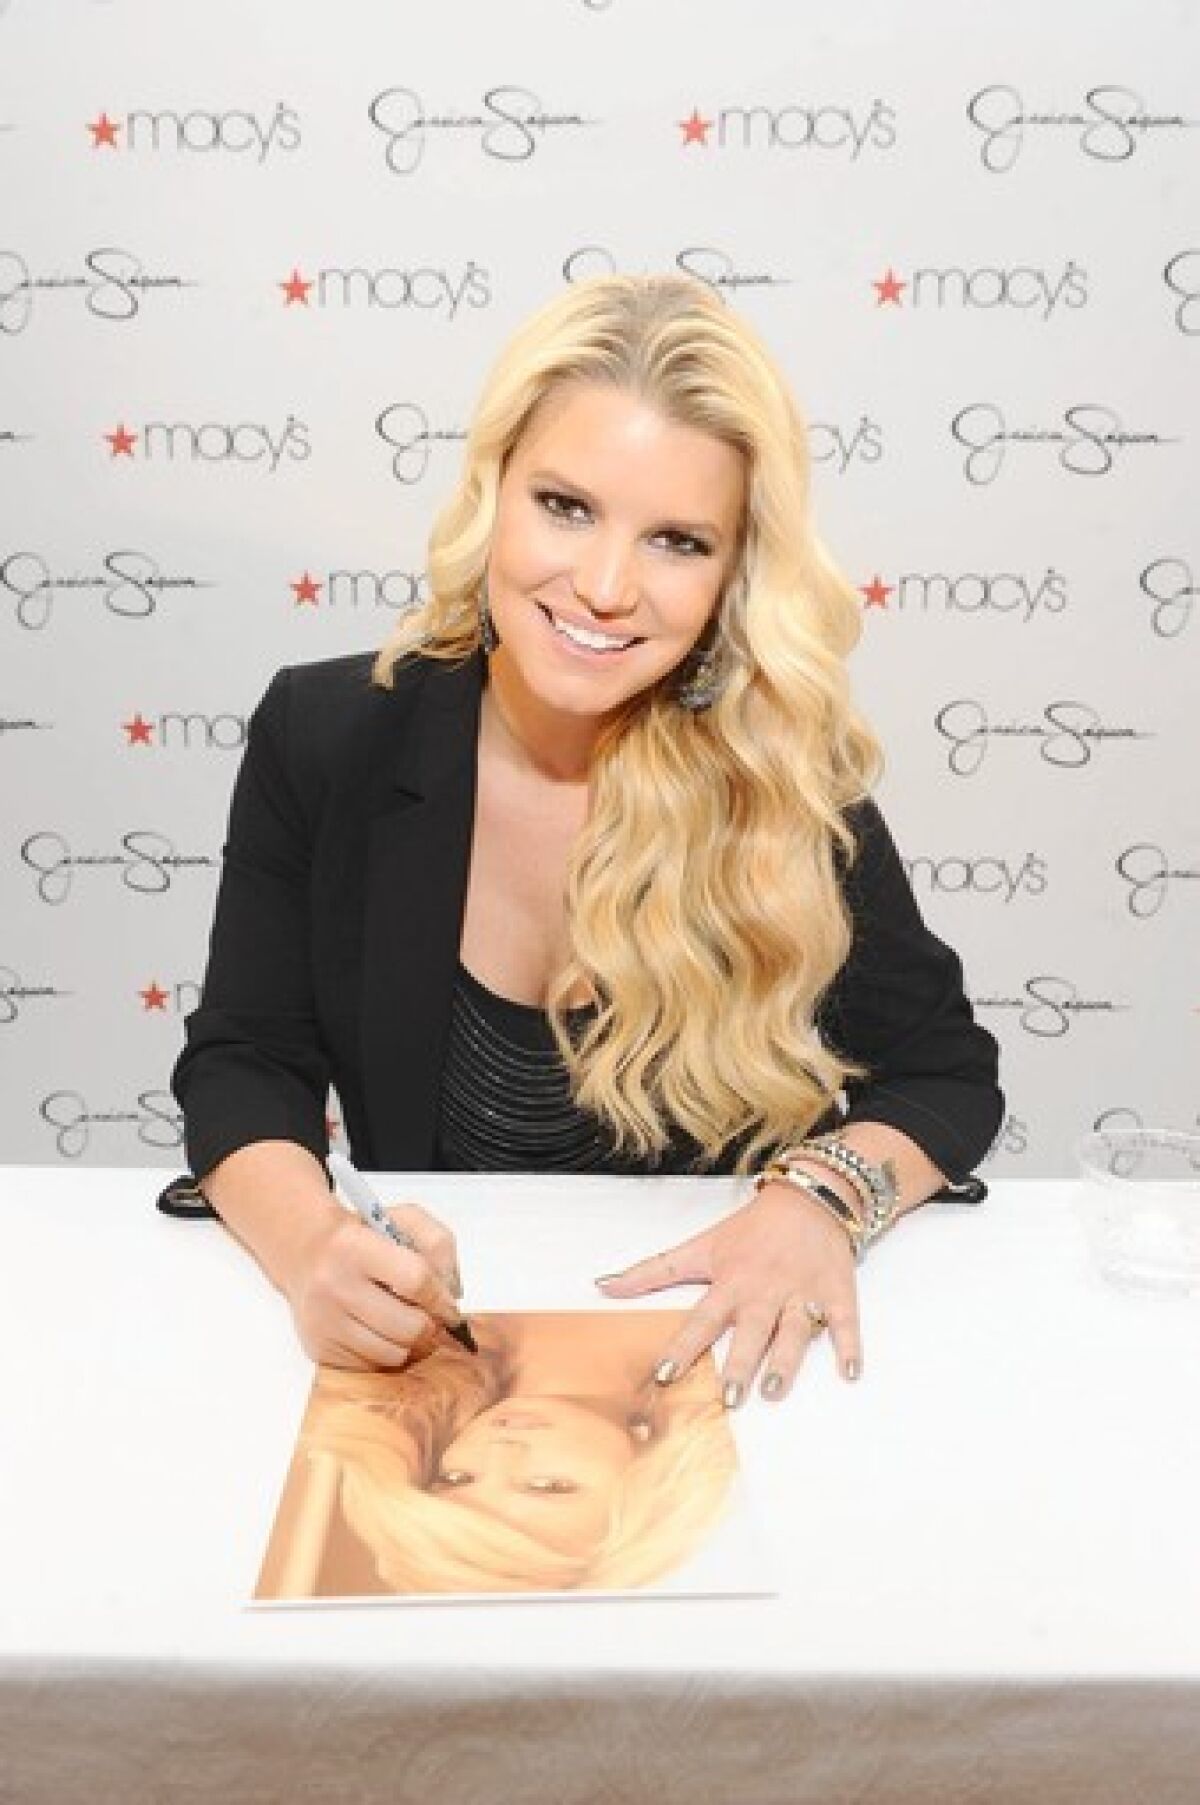 Jessica Simpson's retail sales are expected to reach $1 billion by next year.